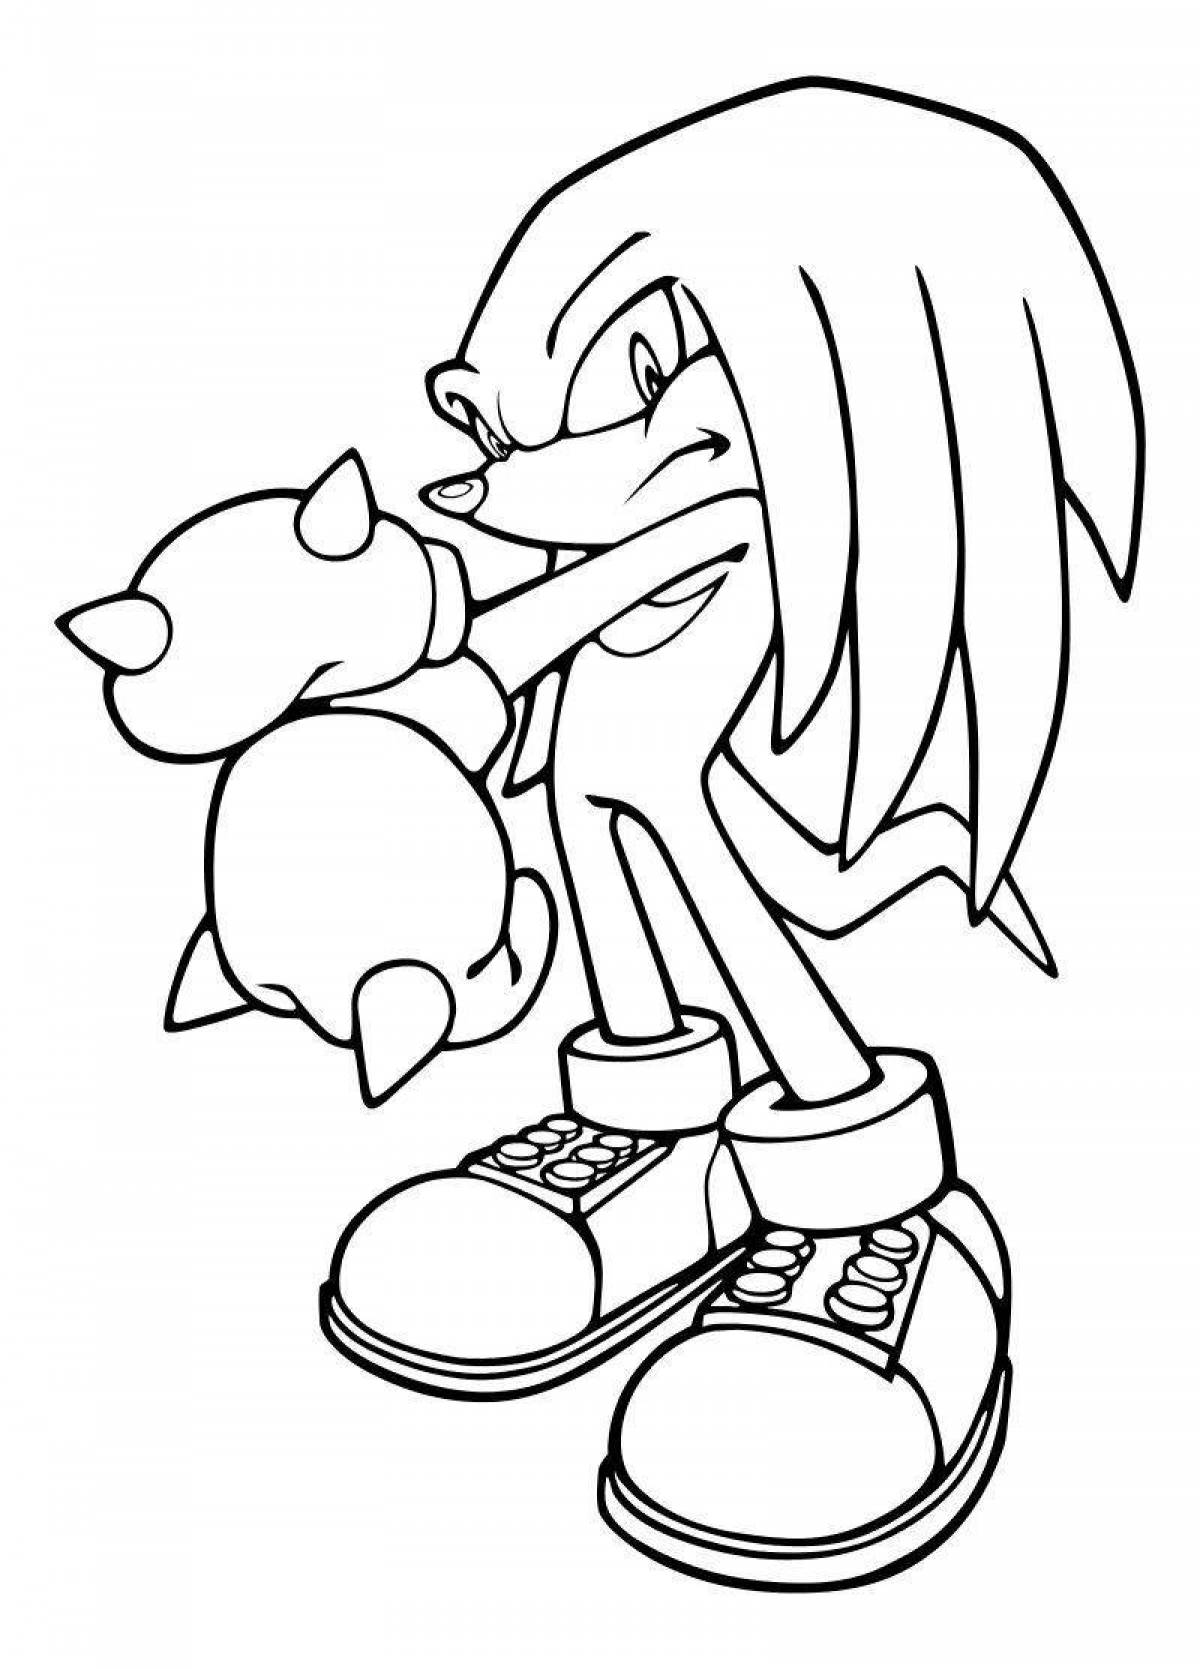 Super knuckles colorful coloring book